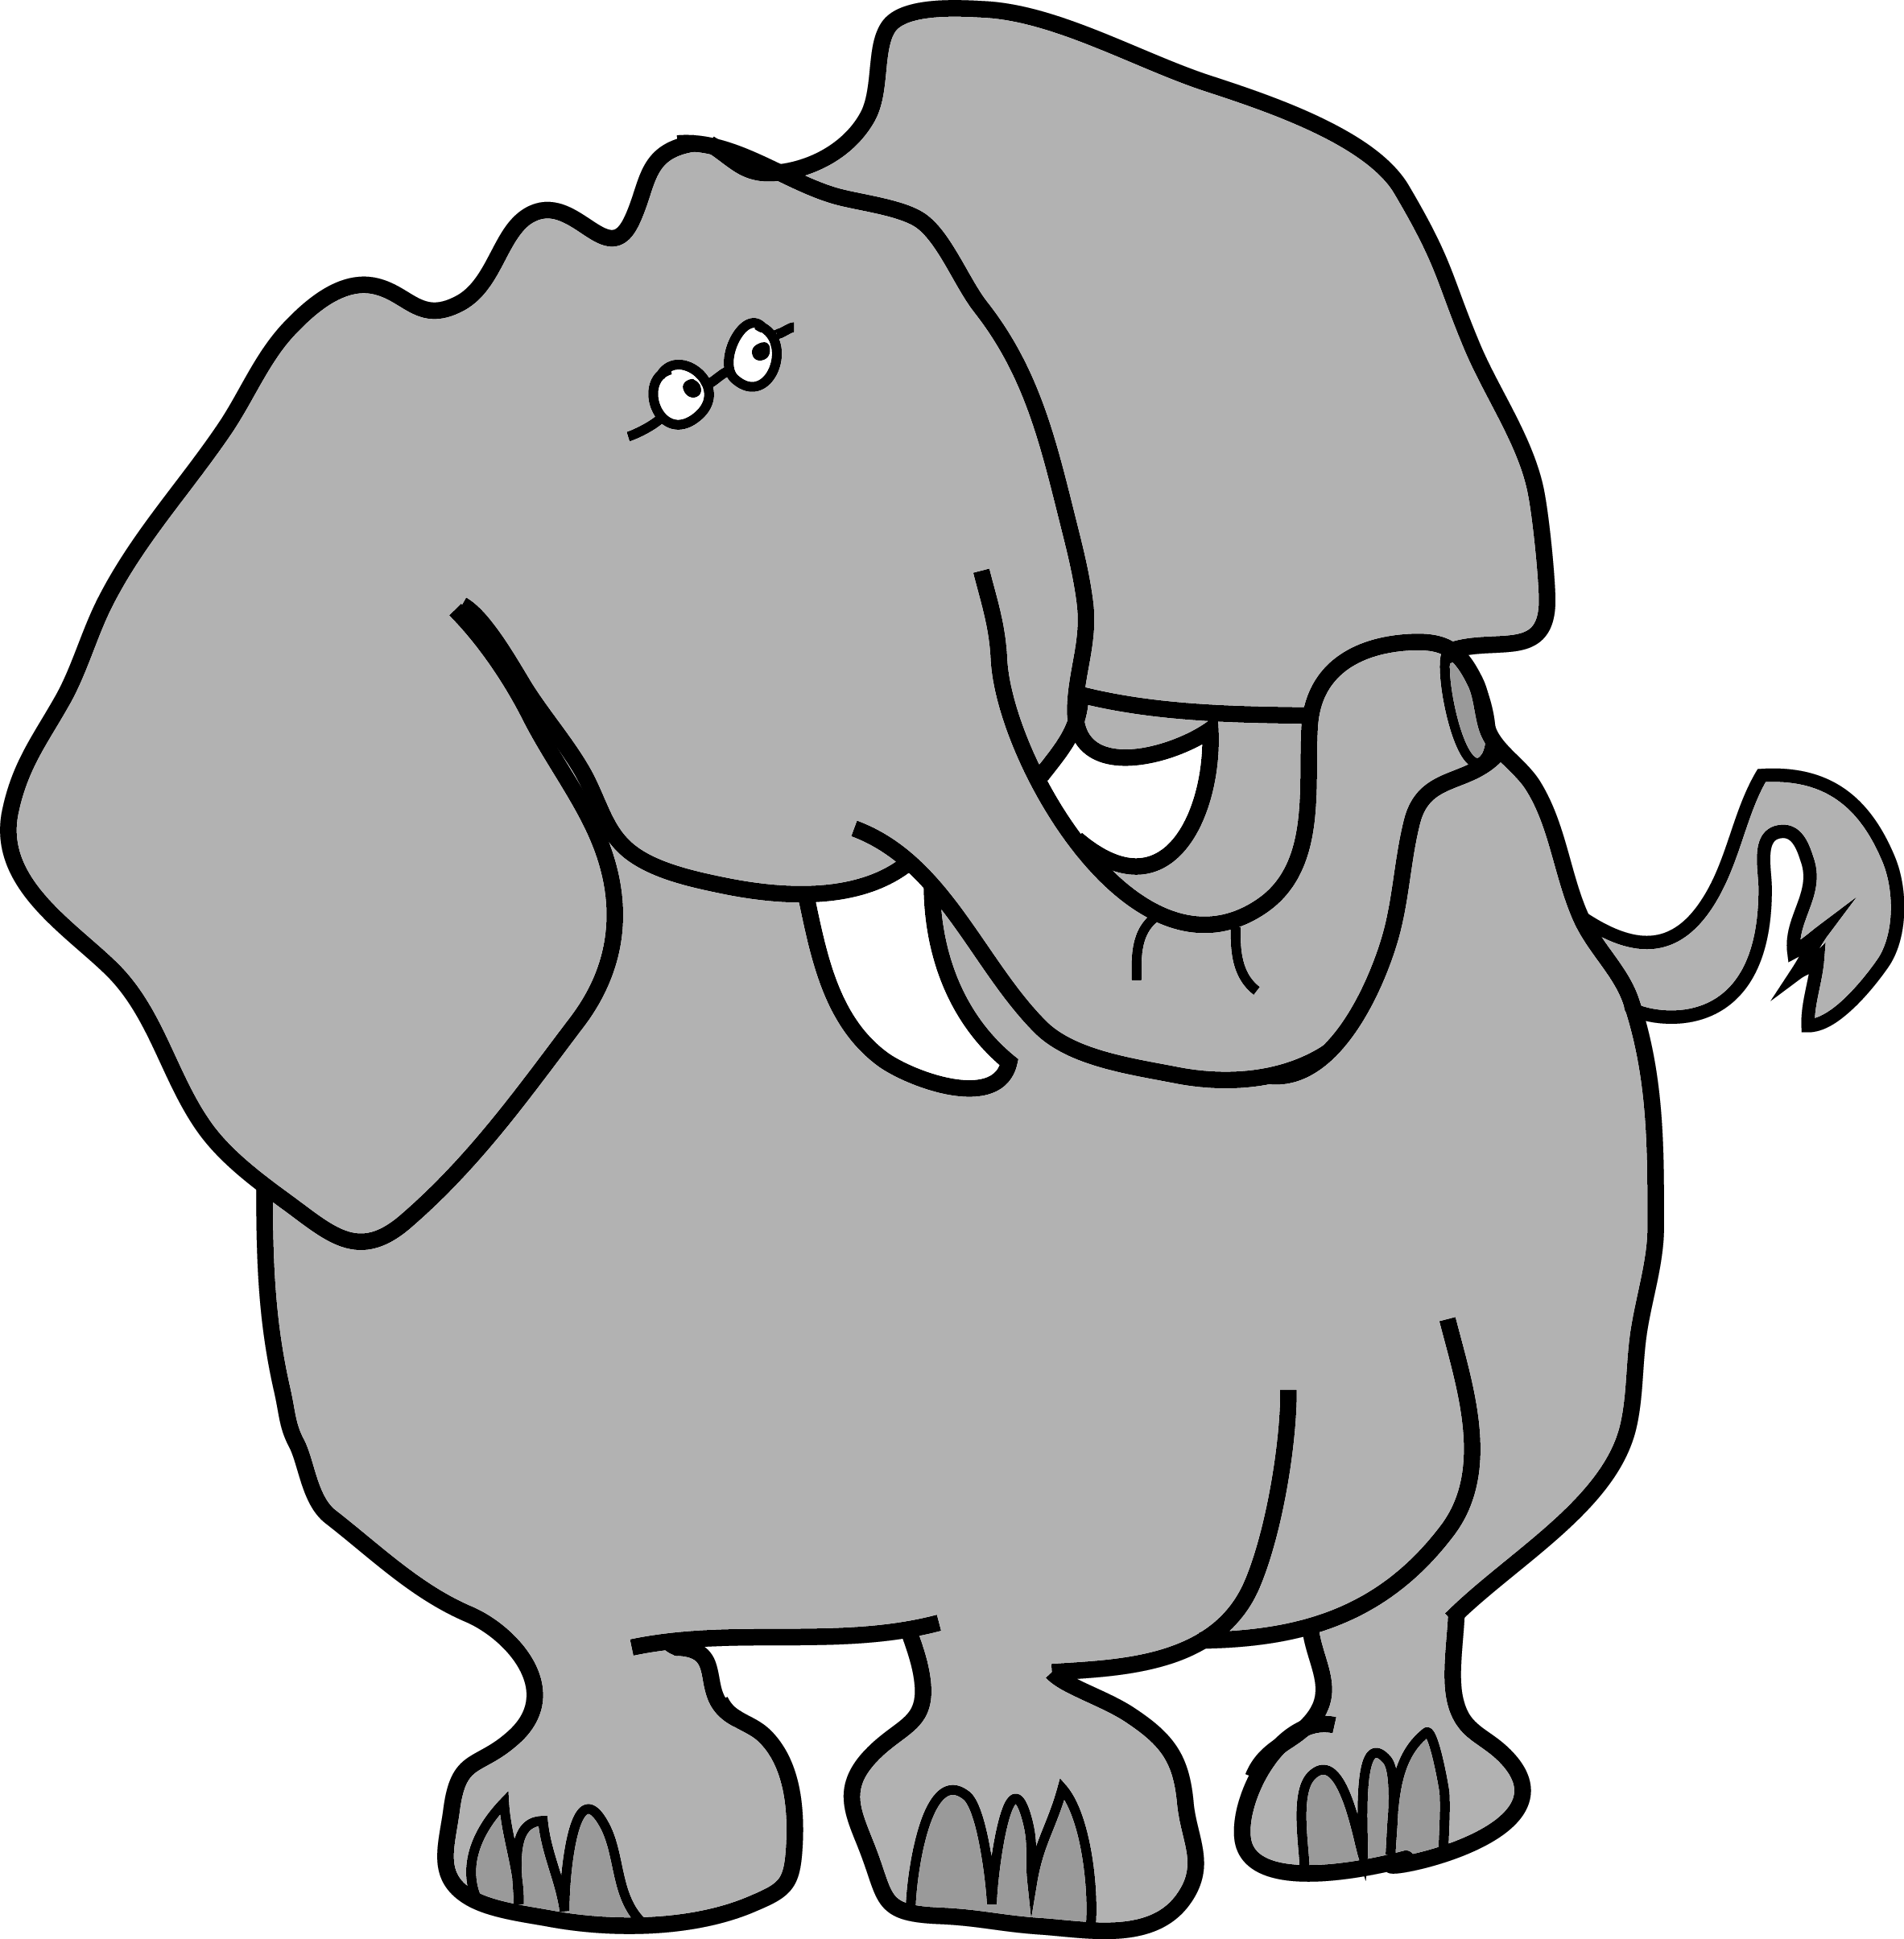 See - Clipart Of Big Elephant (2365x2409)